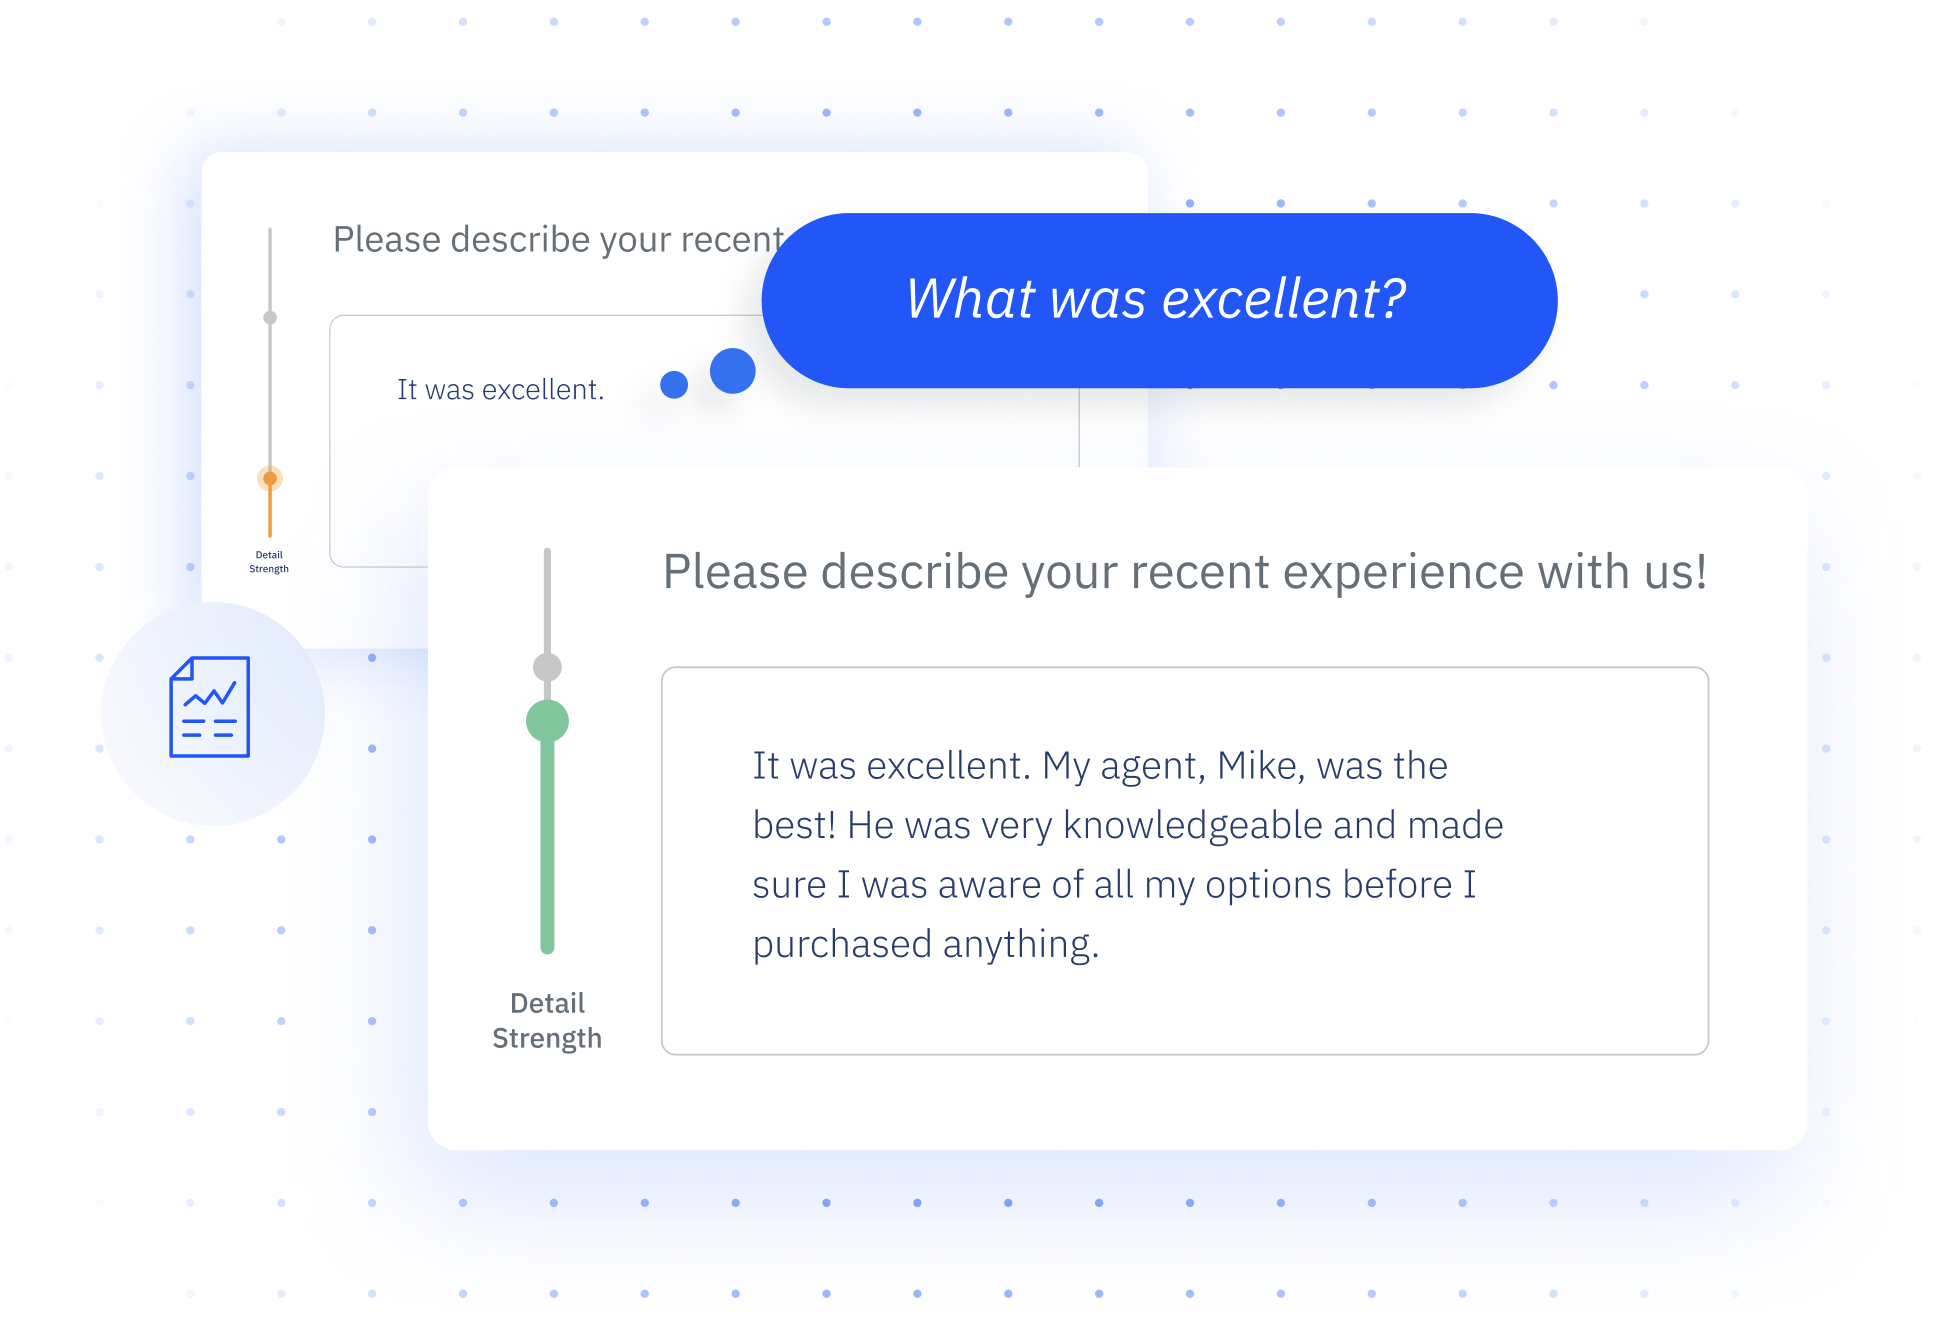 Conversational Surveys: InMoment’s patented, AI-Powered Engagement Engine™ encourages rich conversations by intelligently listening and responding to customers in real time, eliciting not only more, but more valuable responses.